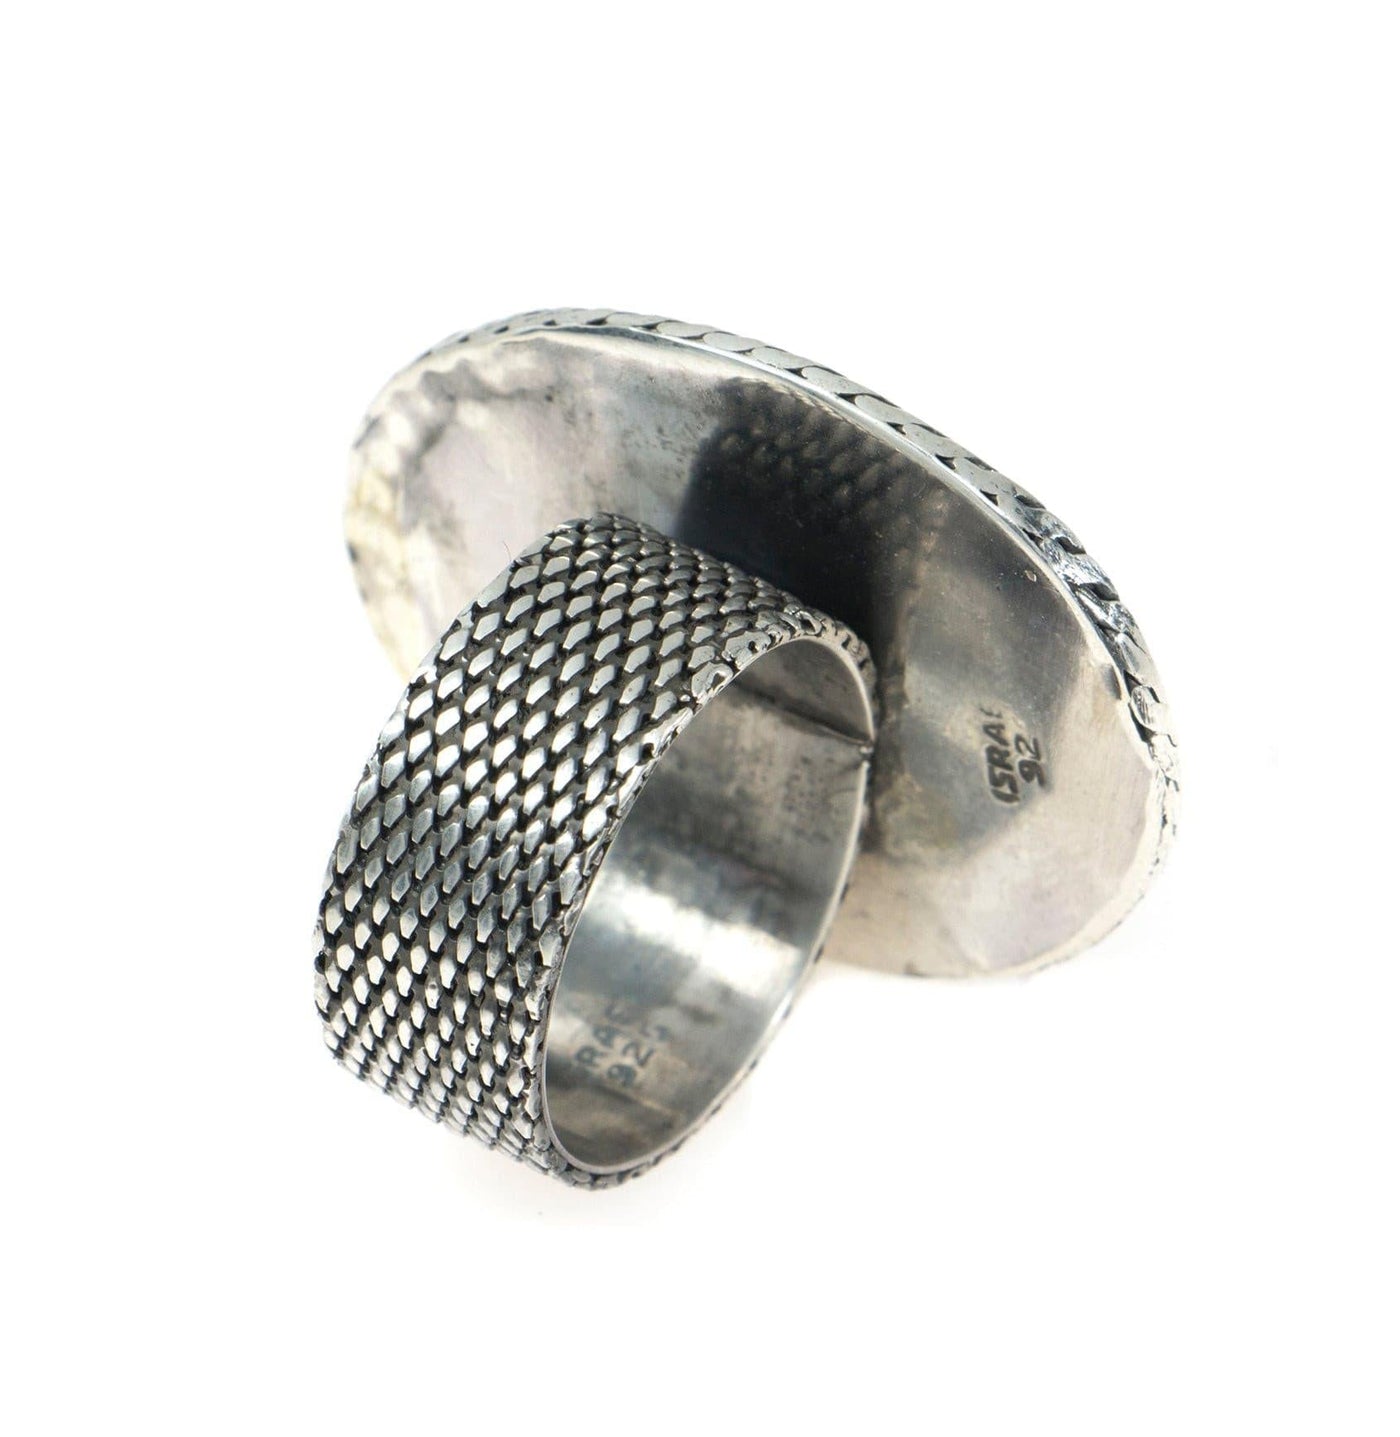 Eilat Stone Ring in 925 Sterling Silver.